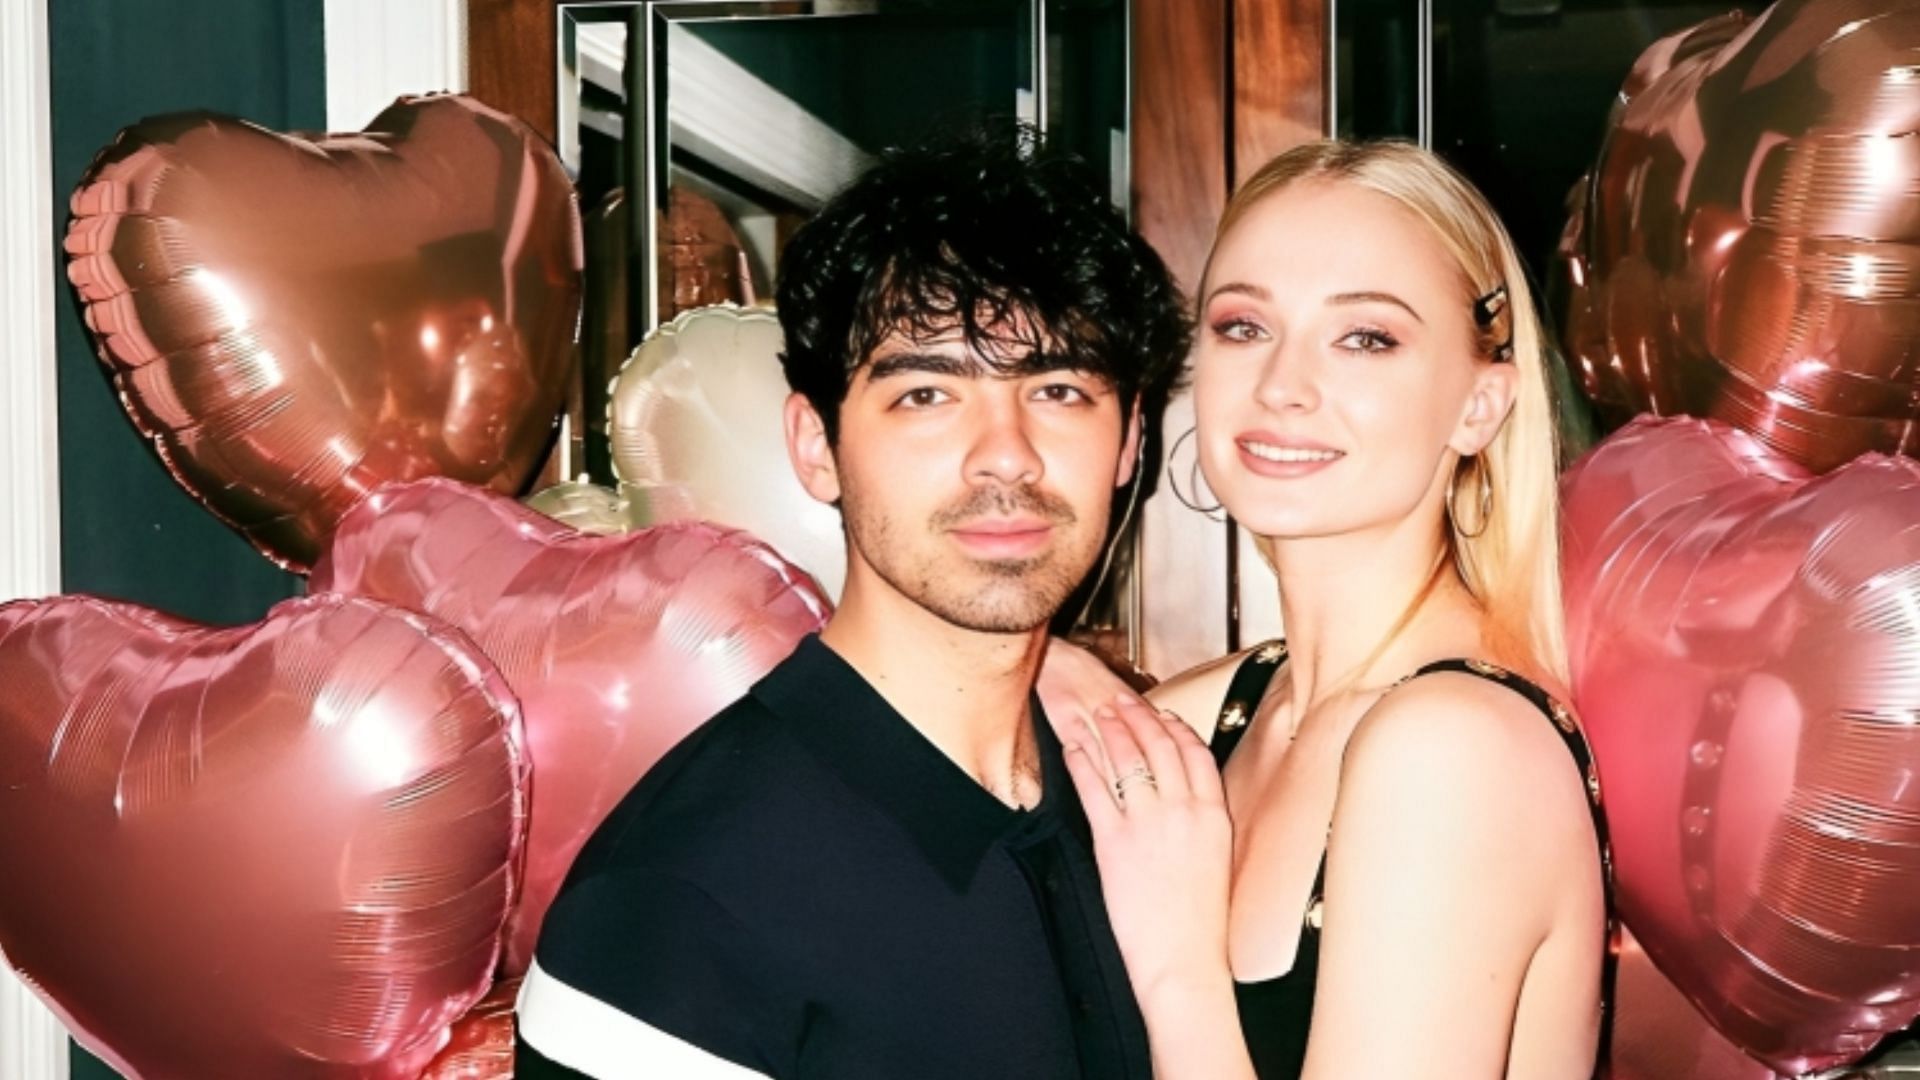 Joe and Sophie divorced each other after four years of marriage (Image via Instagram/@sophiet)